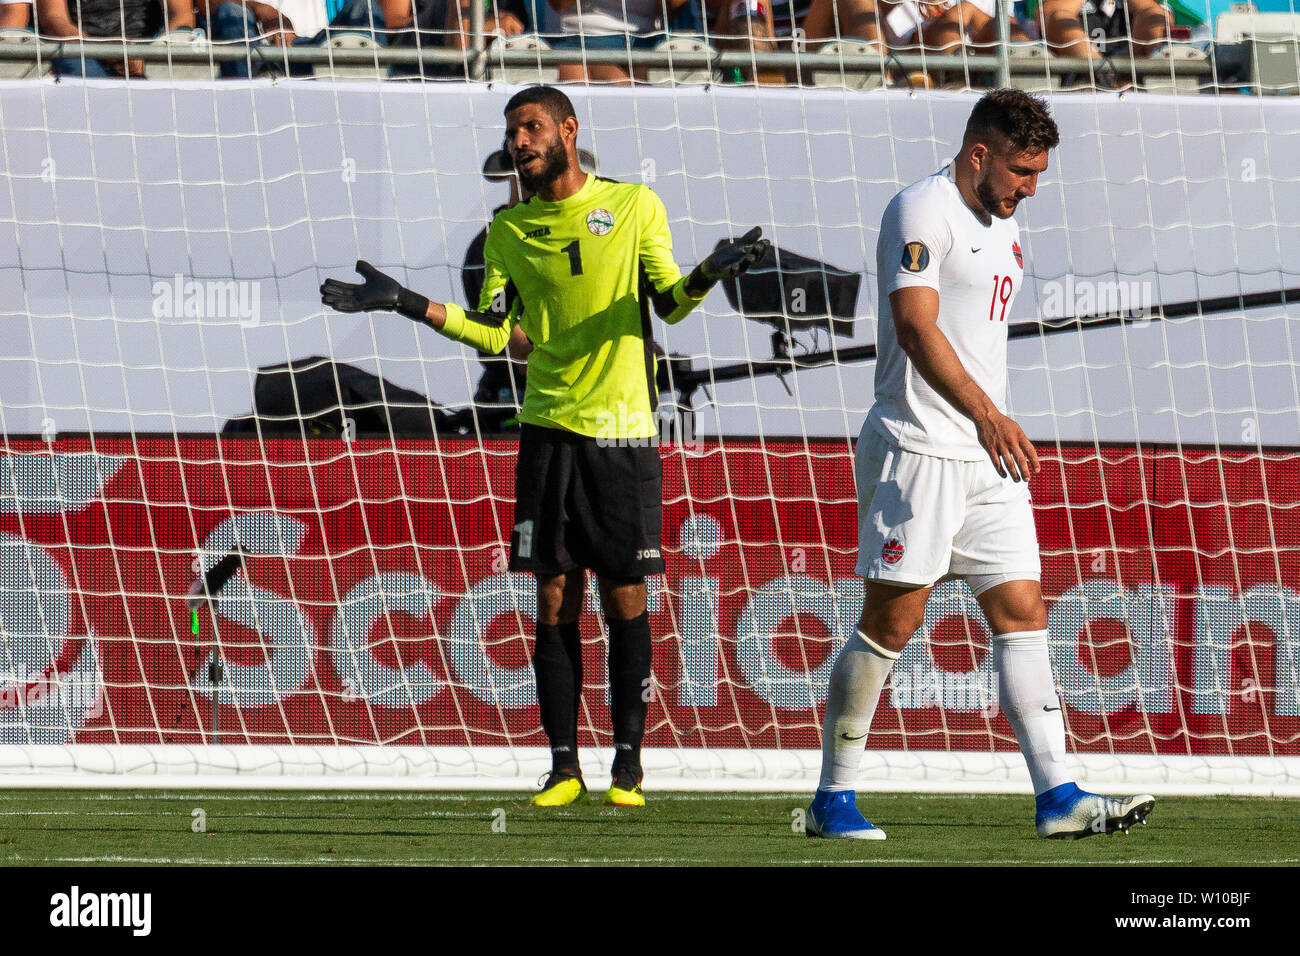 Charlotte, NC, USA. 23rd June, 2019. Cuba goalkeeper Sandy Sanchez (1) reacts to the miss from Canada forward Lucas Cavallini (19) in the 2019 Gold Cup match at Bank of America Stadium in Charlotte, NC. (Scott Kinser) Credit: csm/Alamy Live News Stock Photo